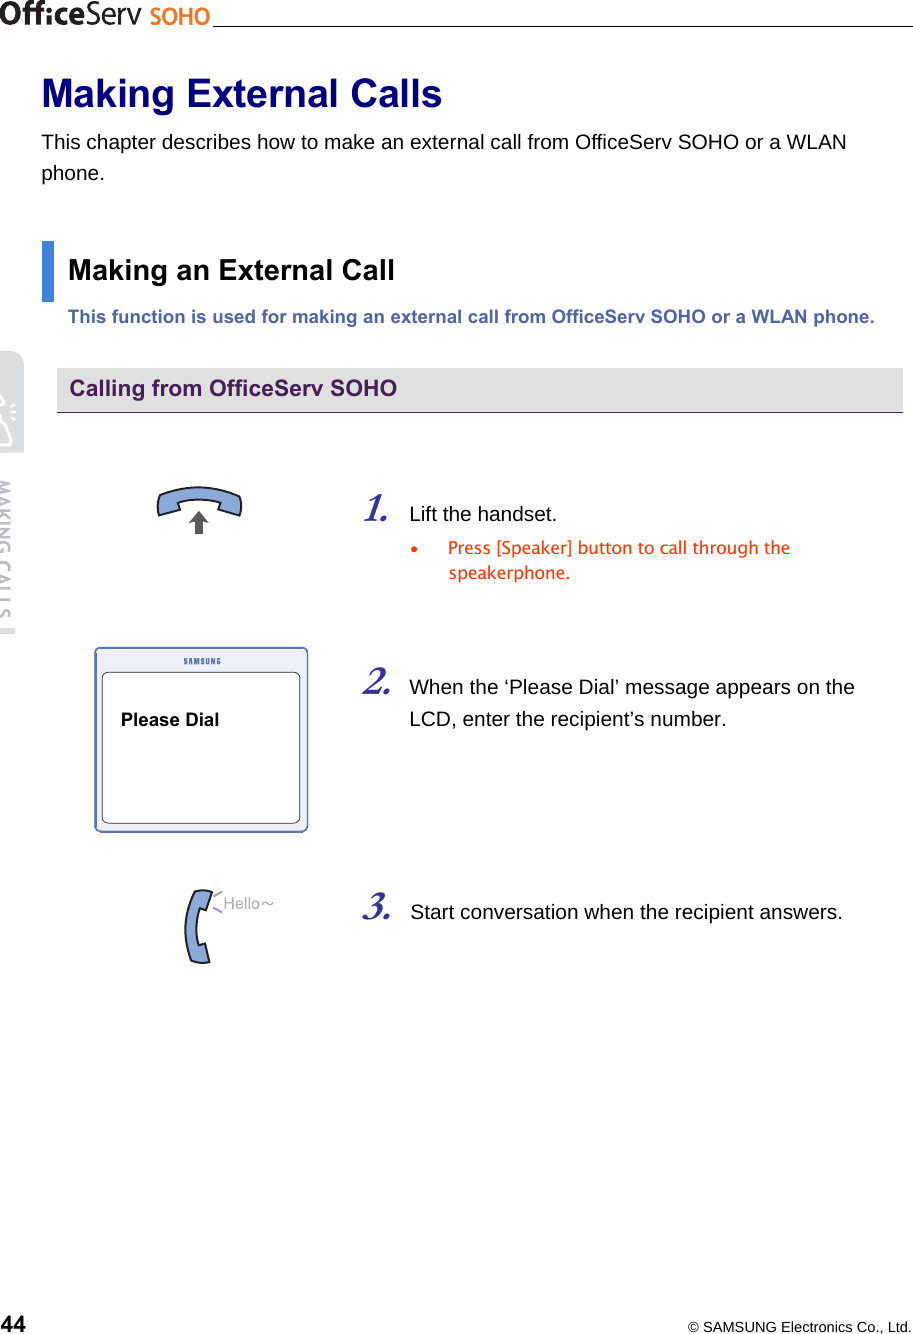    44  © SAMSUNG Electronics Co., Ltd. Making External Calls This chapter describes how to make an external call from OfficeServ SOHO or a WLAN phone.  Making an External Call This function is used for making an external call from OfficeServ SOHO or a WLAN phone.  Calling from OfficeServ SOHO   1. Lift the handset. •  Press [Speaker] button to call through the speakerphone.   2. When the ‘Please Dial’ message appears on the LCD, enter the recipient’s number.       3. Start conversation when the recipient answers.   Please Dial 